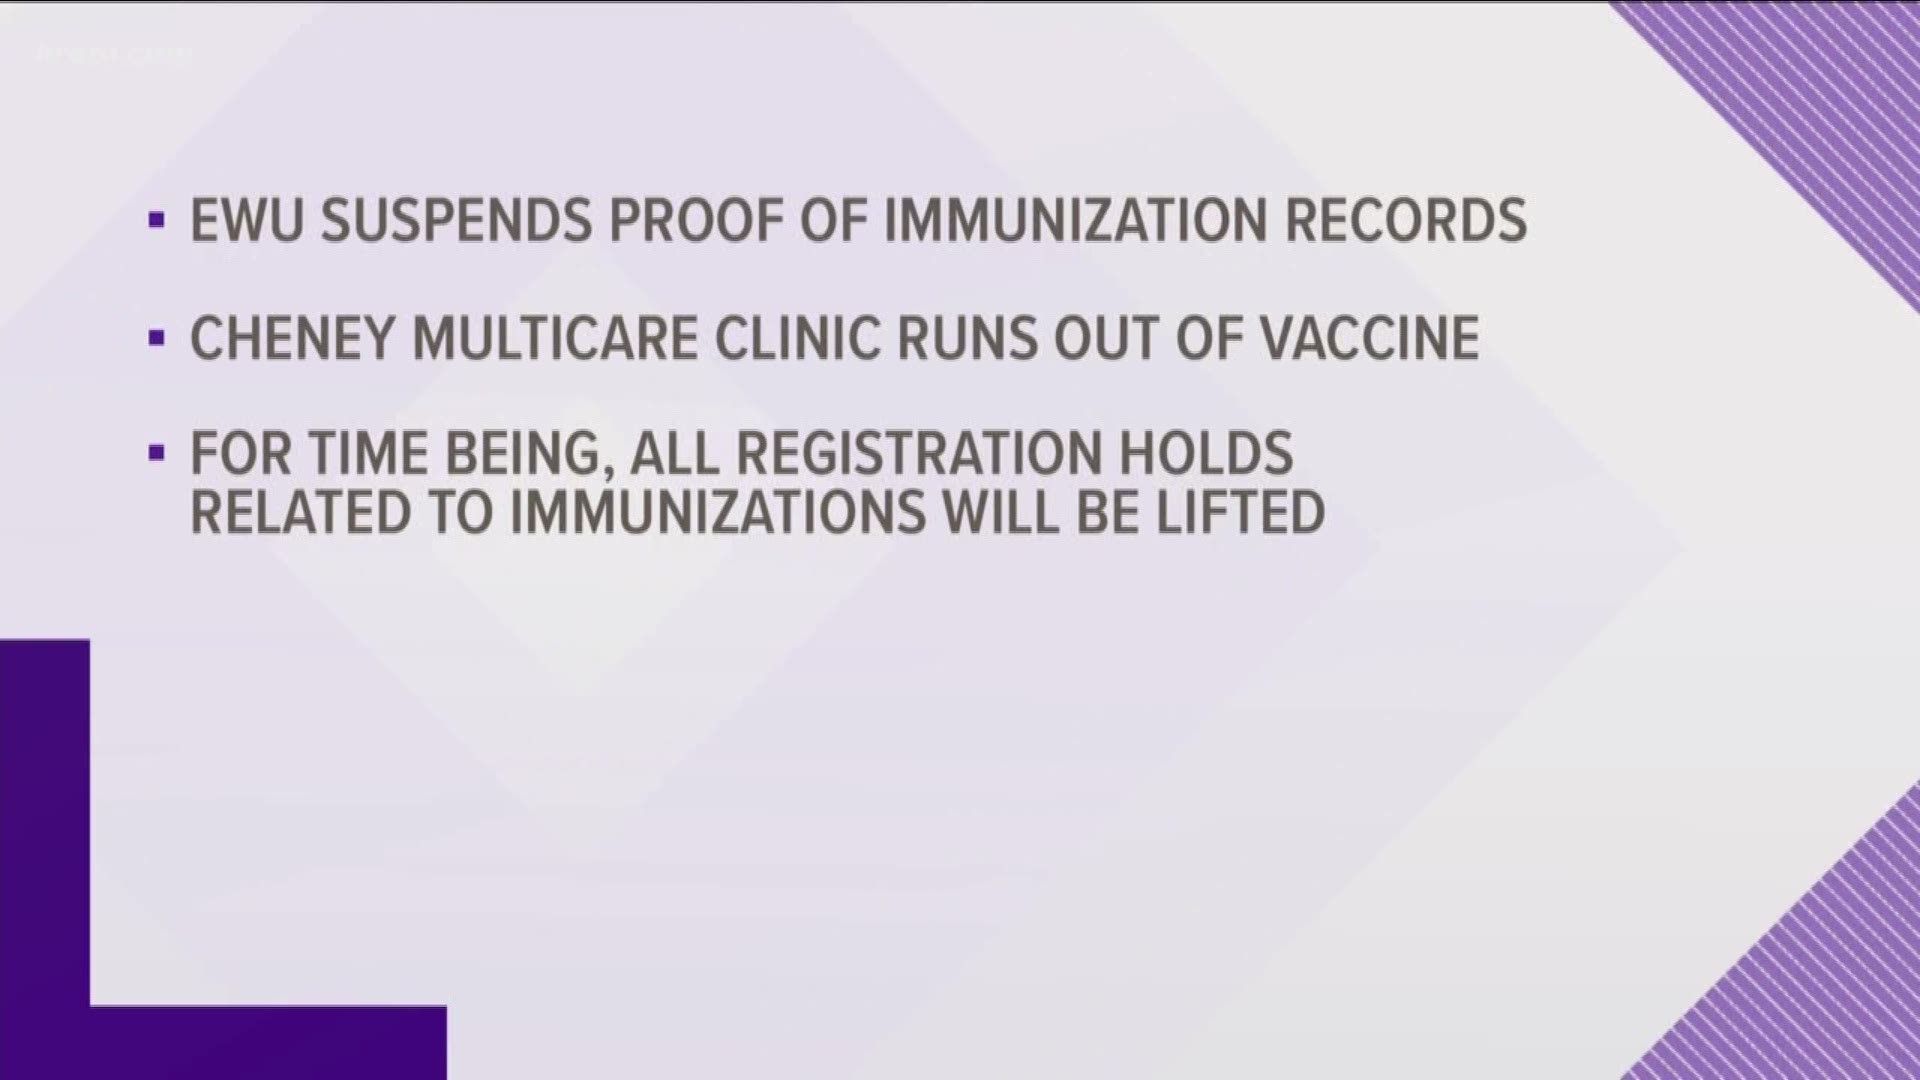 In February, the EWU Board of Trustees passed a policy requiring all students to provide proof of MMR vaccination.